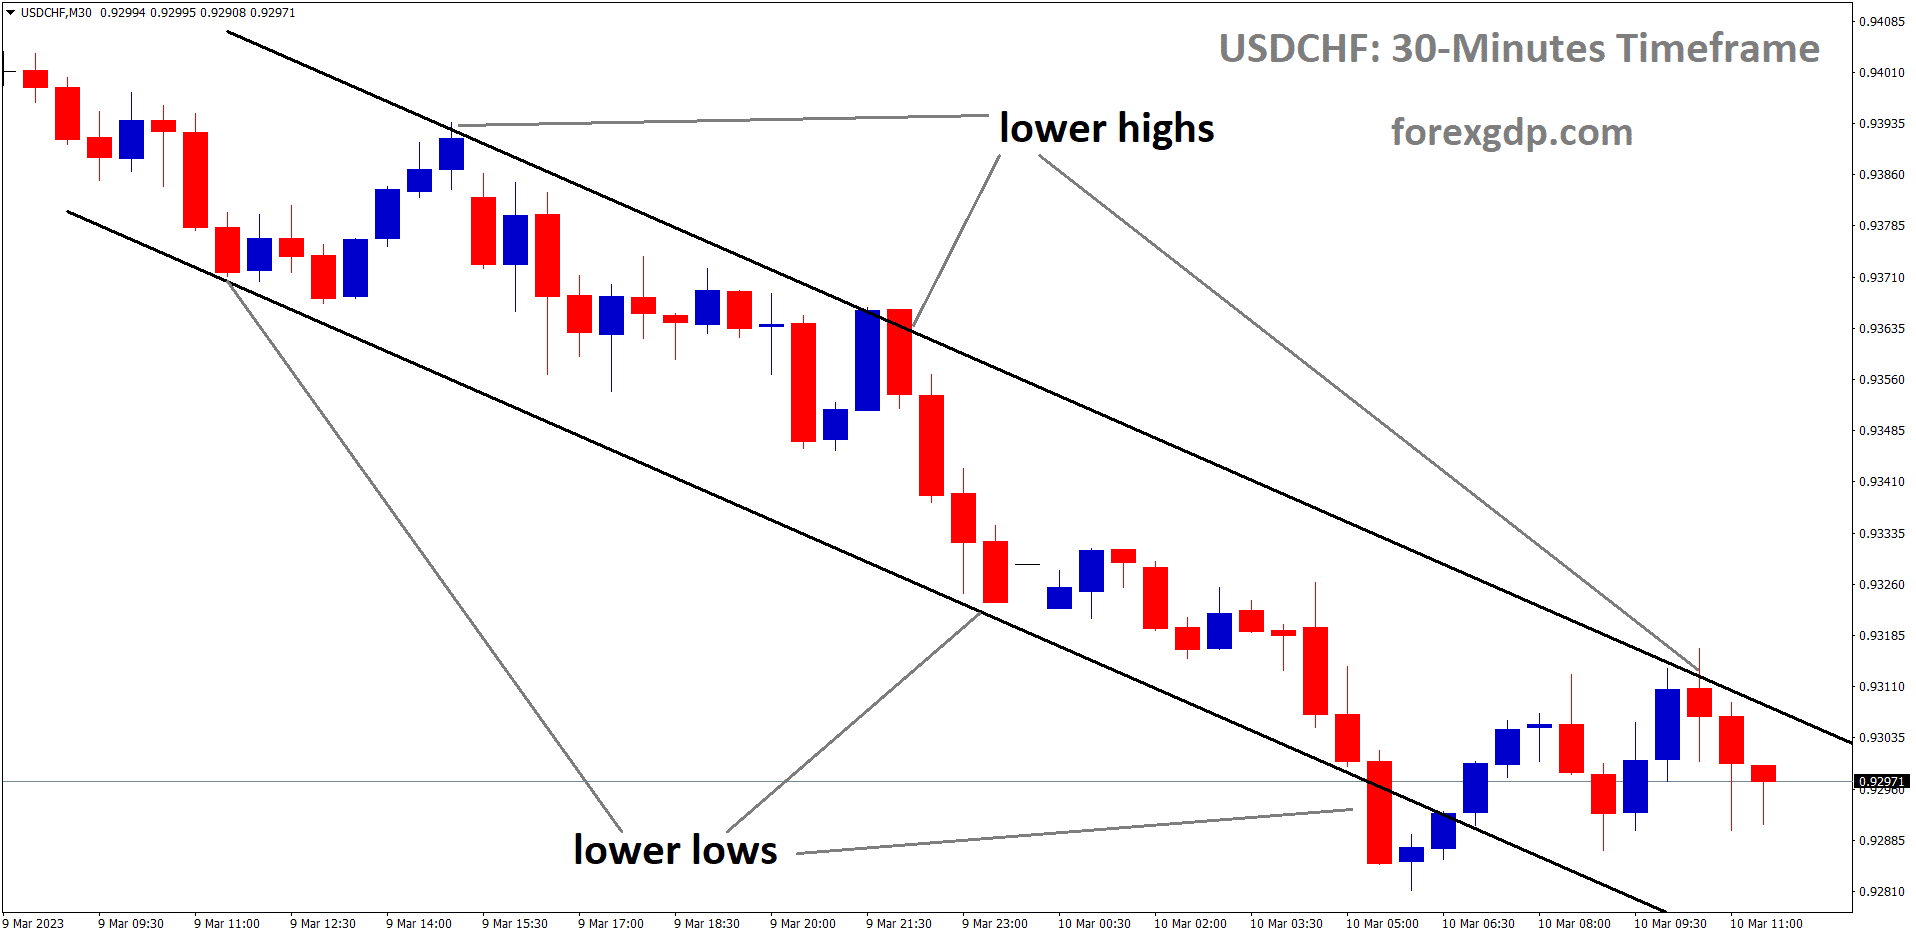 USDCHF is moving in Descending channel and the market has fallen from the lower high area of the channel.